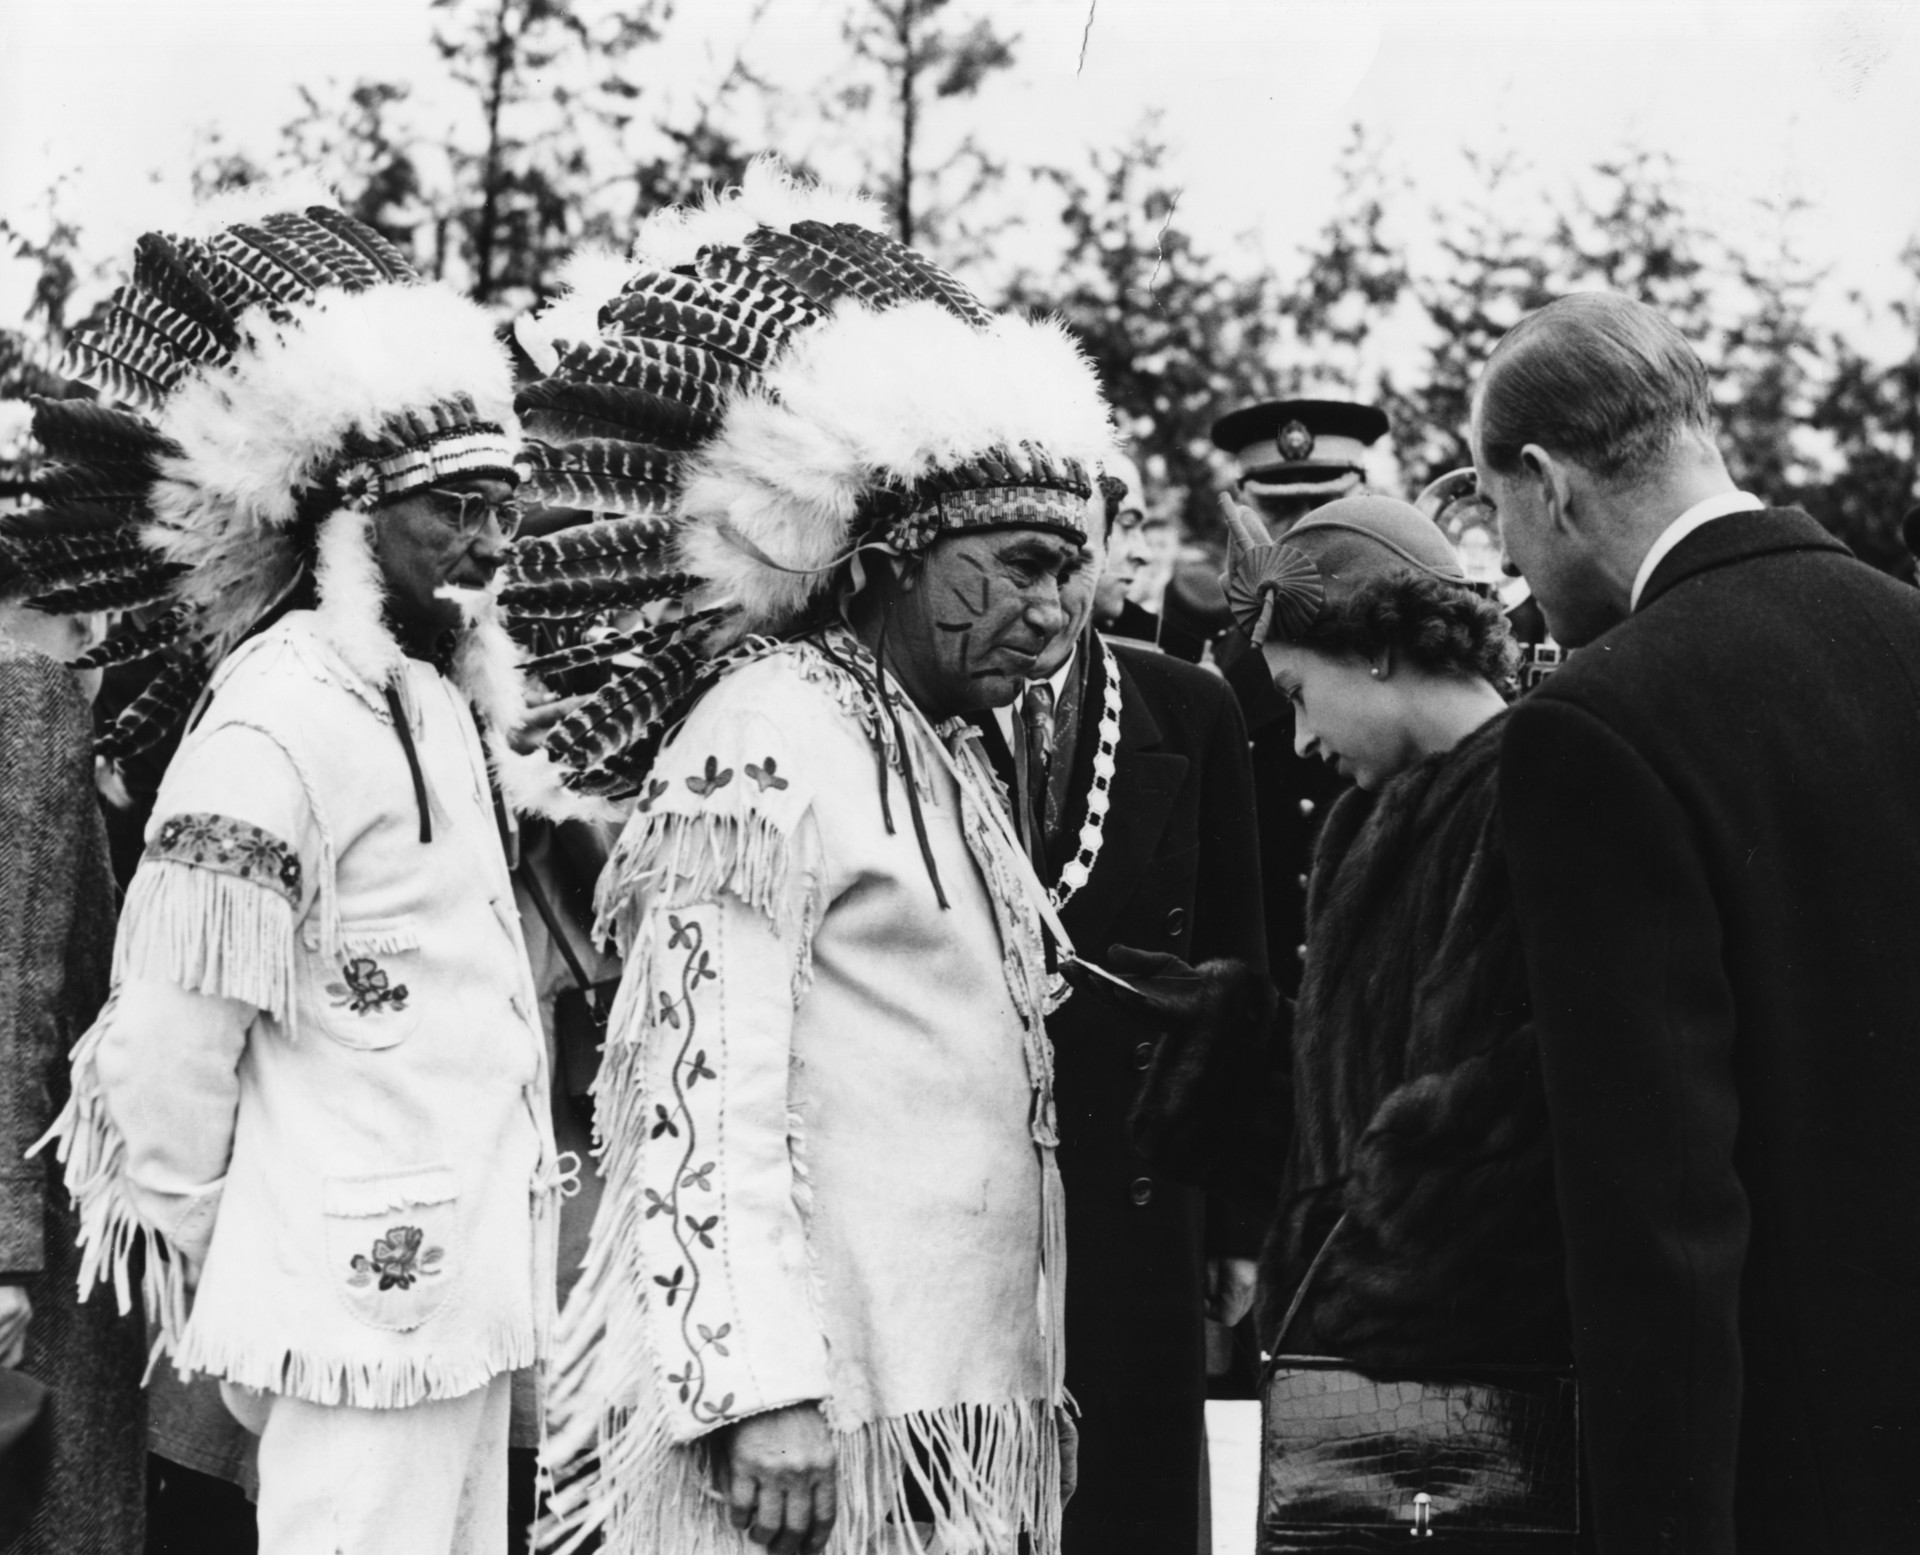 Princess Elizabeth and Prince Philip greet members of the Ojiway First Nation during their tour of Fort William.<p><a href="https://www.msn.com/en-nz/community/channel/vid-7xx8mnucu55yw63we9va2gwr7uihbxwc68fxqp25x6tg4ftibpra?cvid=94631541bc0f4f89bfd59158d696ad7e">Follow us and access great exclusive content every day</a></p>